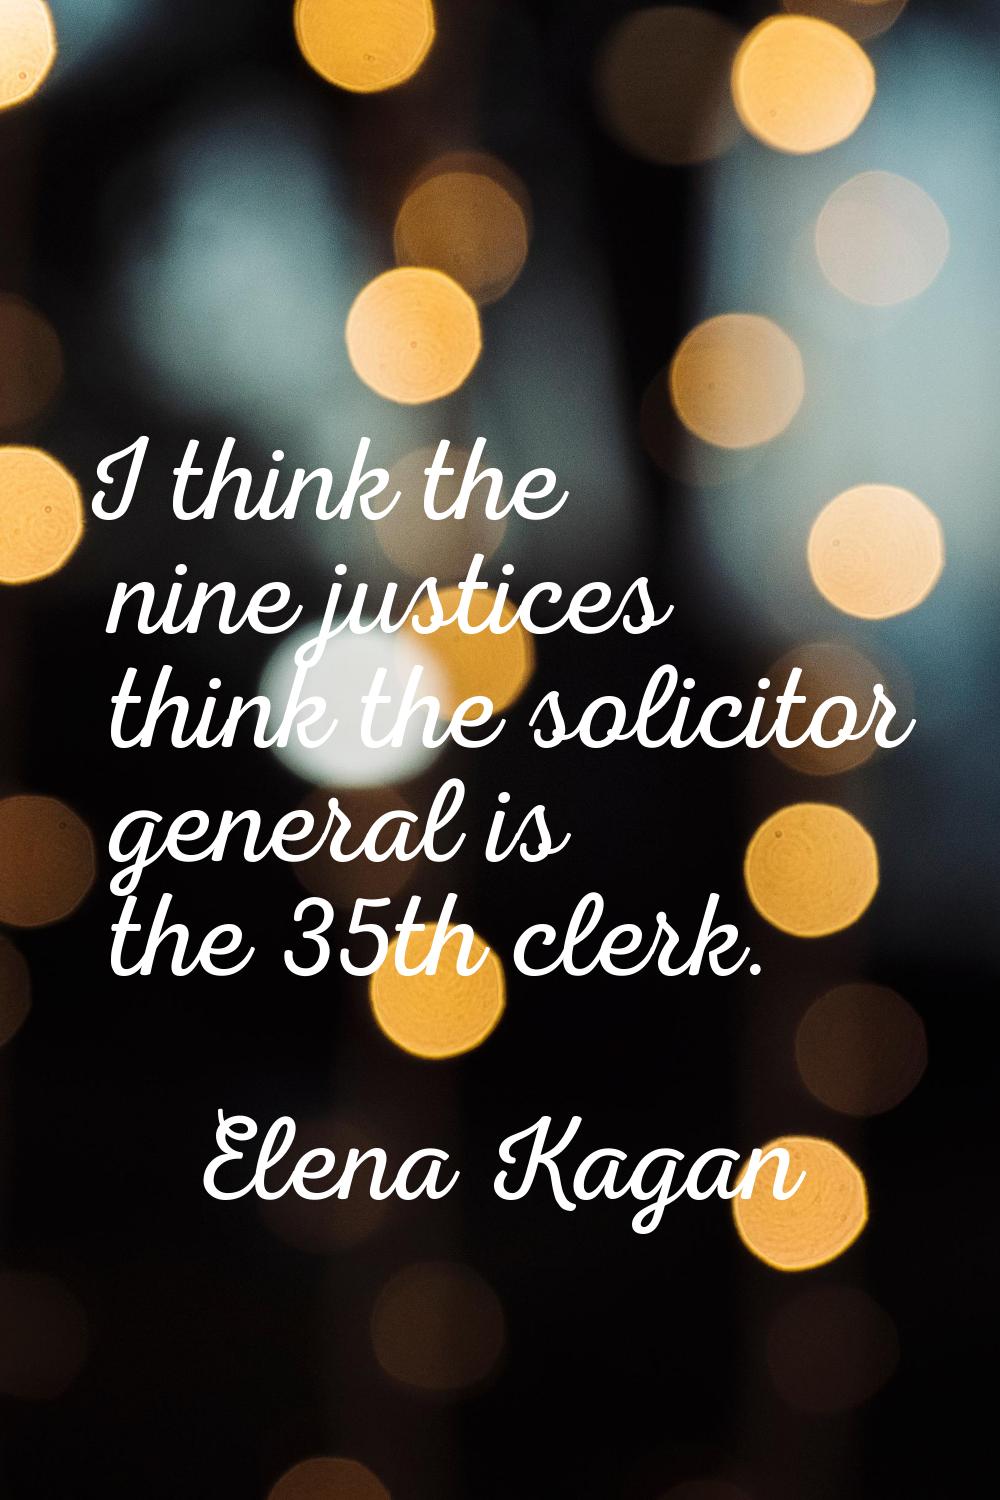 I think the nine justices think the solicitor general is the 35th clerk.